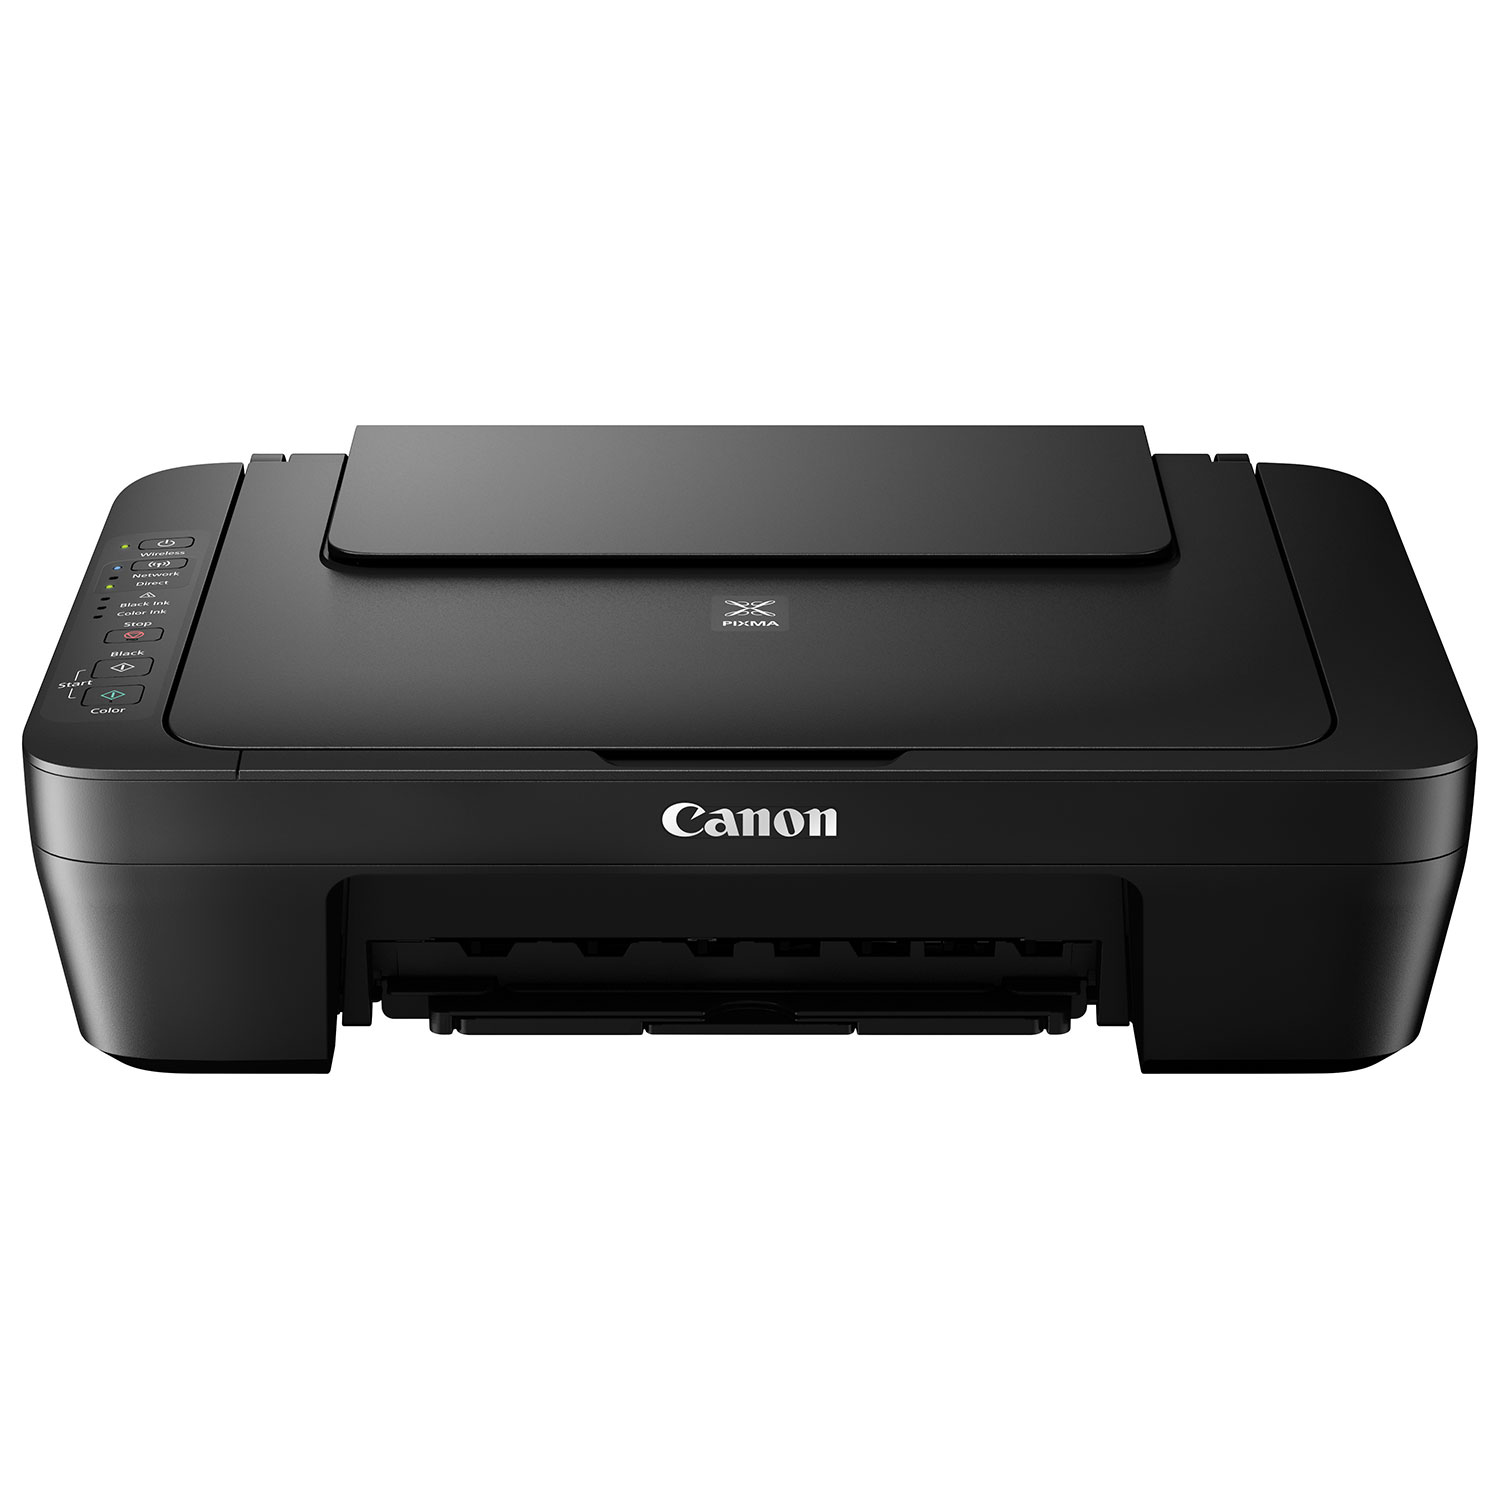 What are some highly rated Canon scanners and printers?